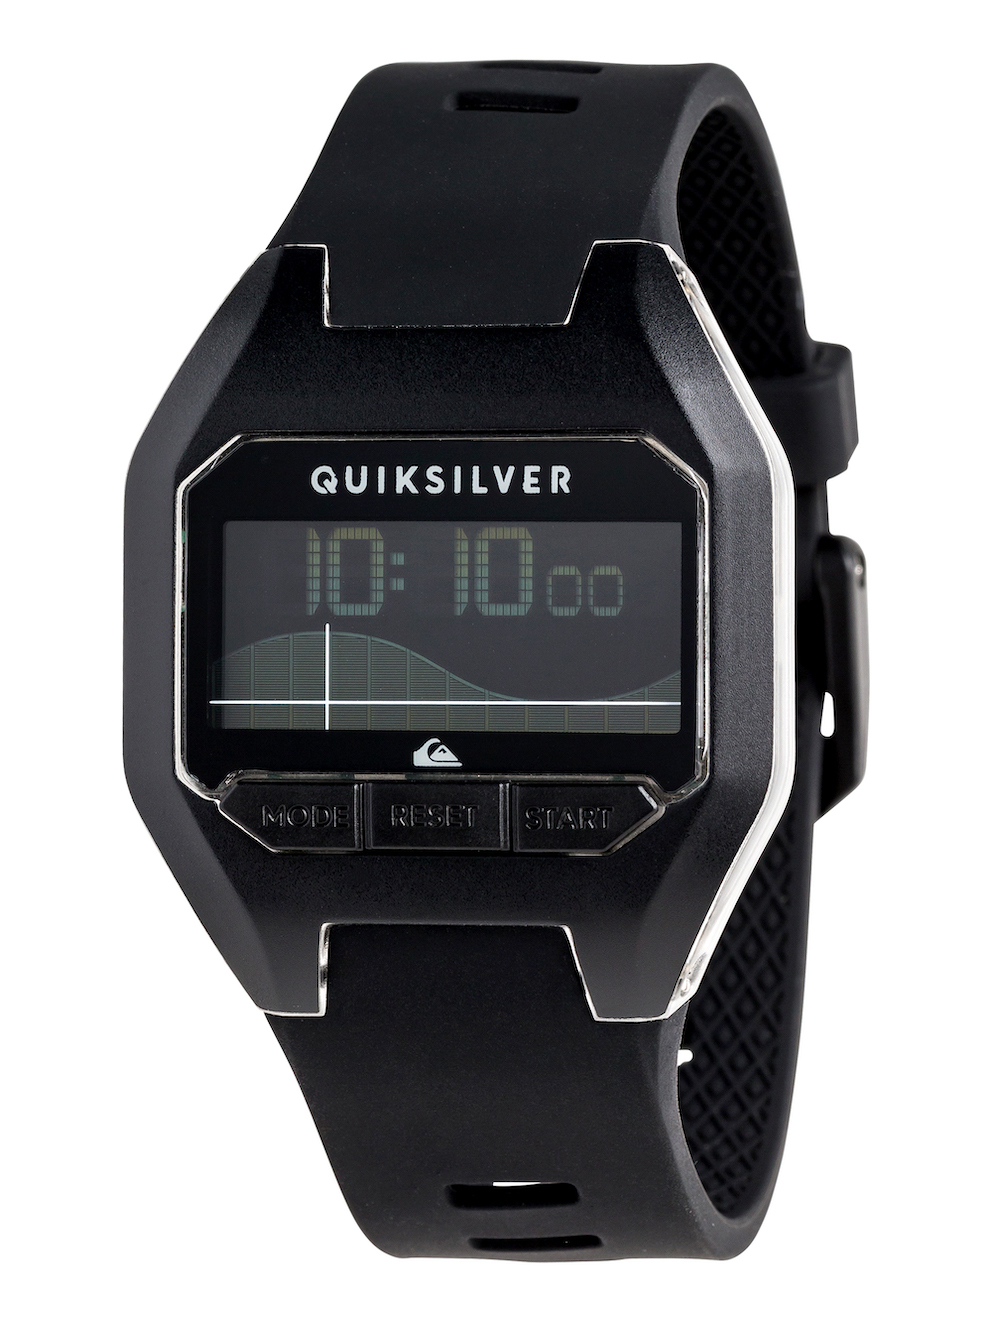 Quiksilver & Roxy SS20 Watches